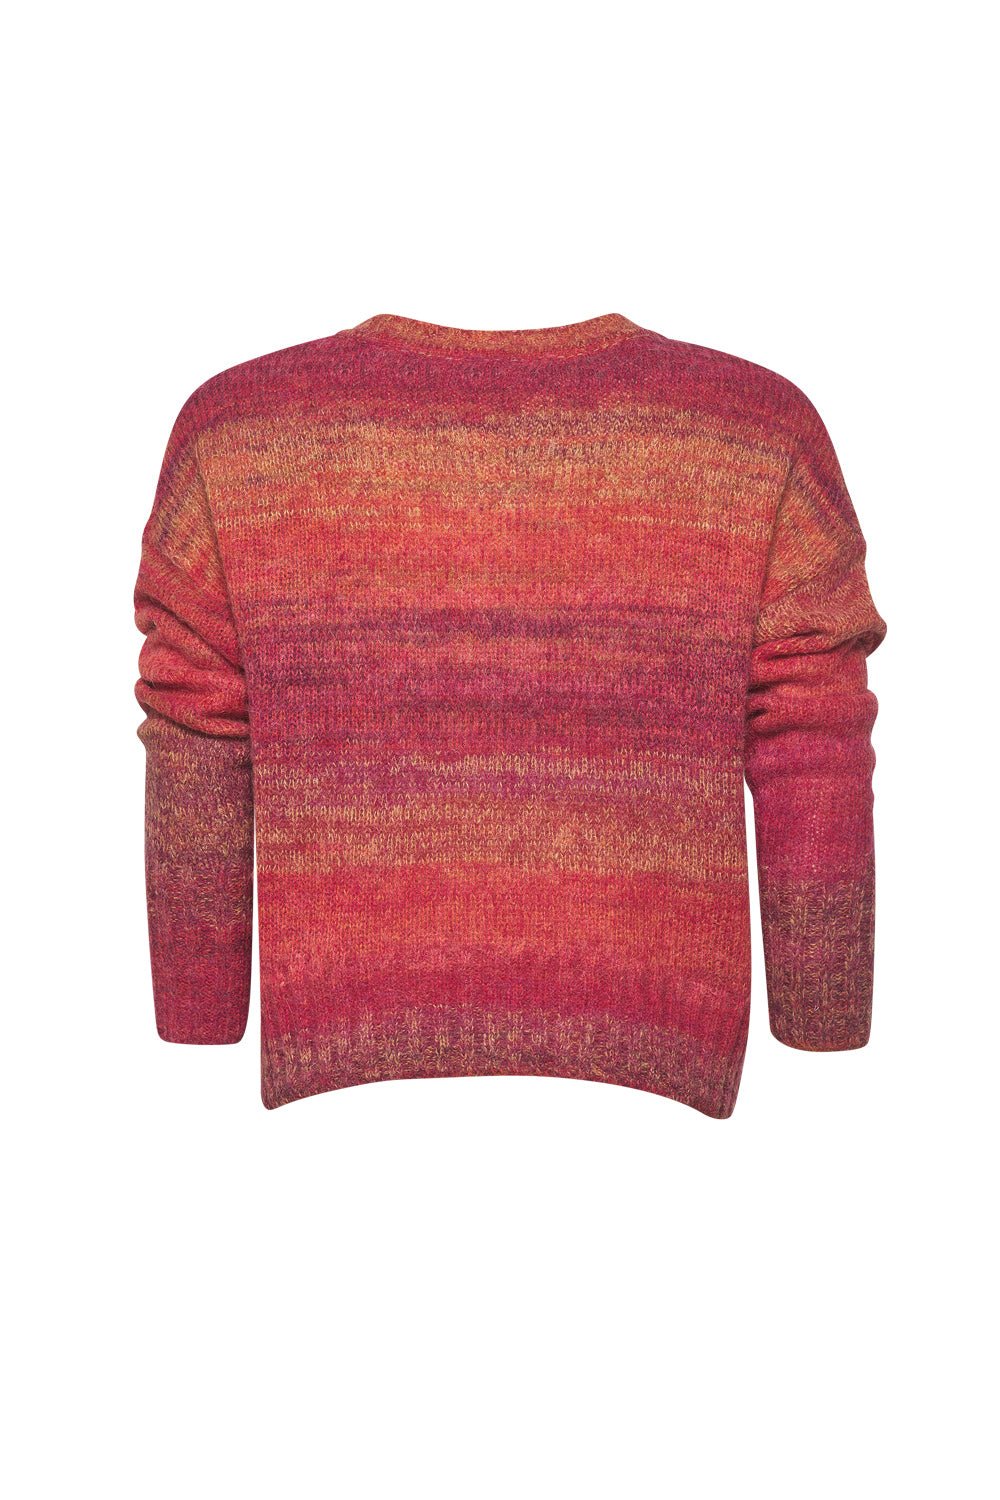 Shop Dietrich Sweater| Flame Ombre - Loobies Story